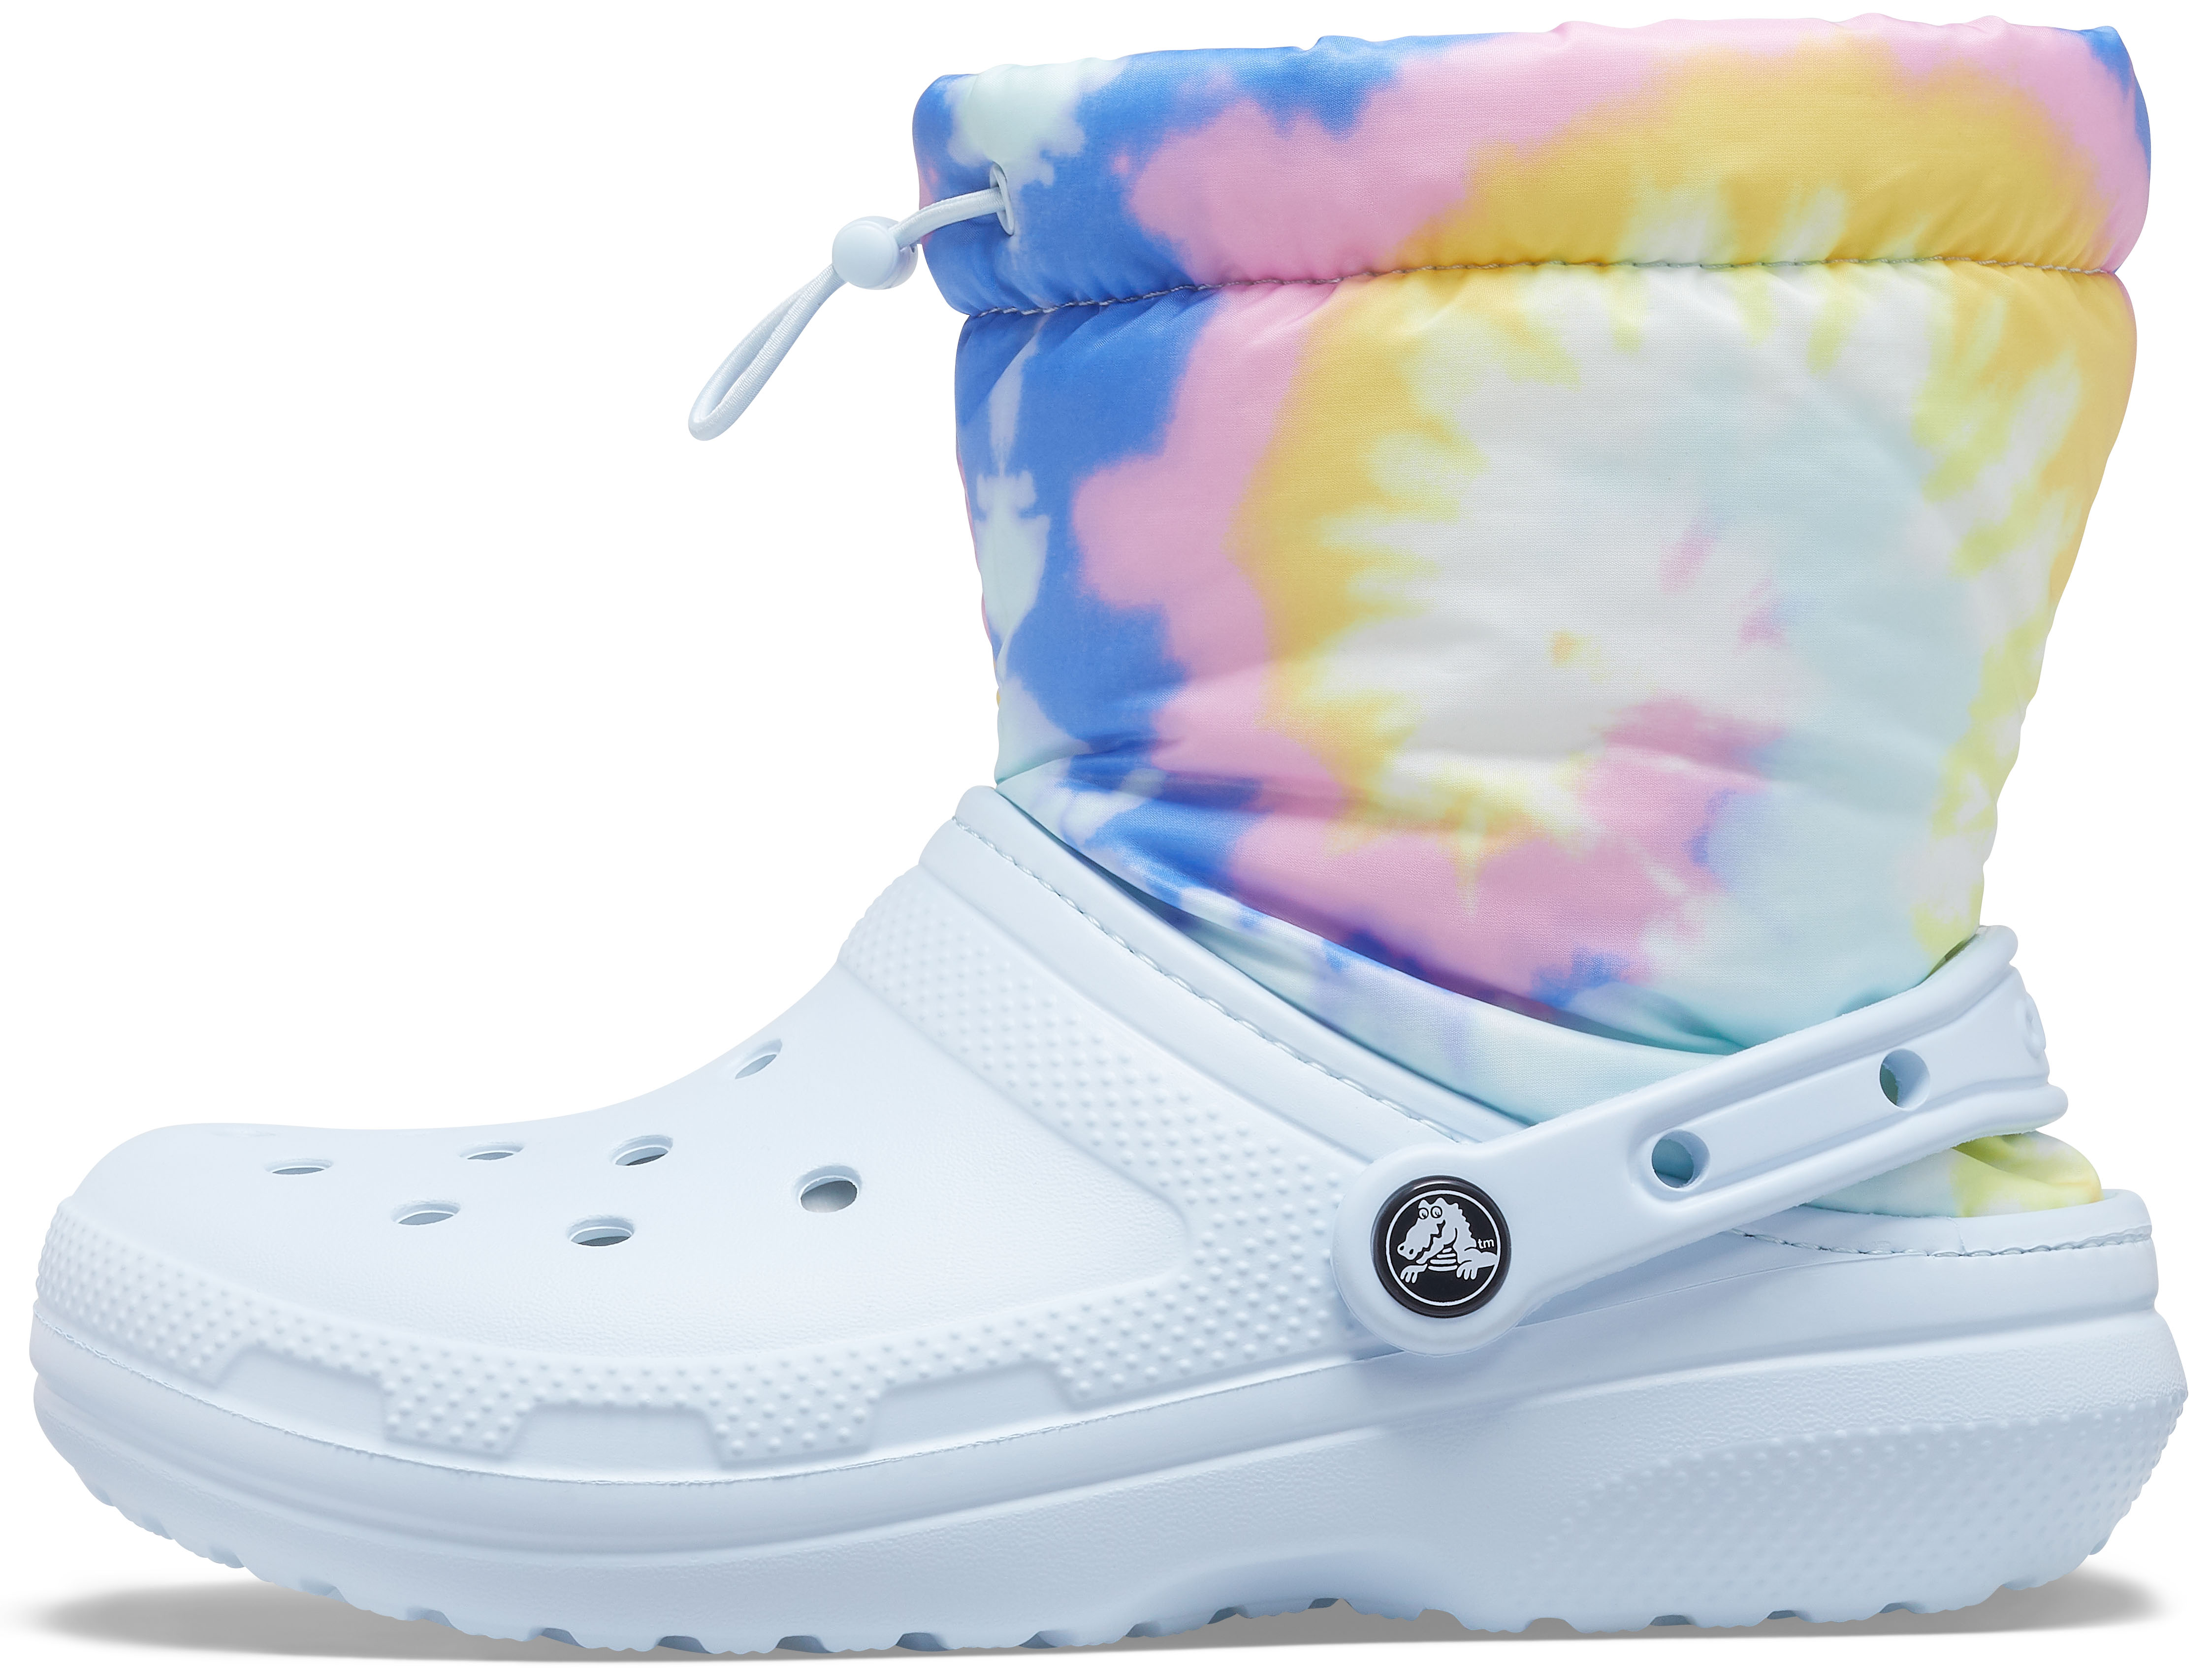 Classic Lined Neo Puff Tie Dye Boot Mineral Blue Croslite